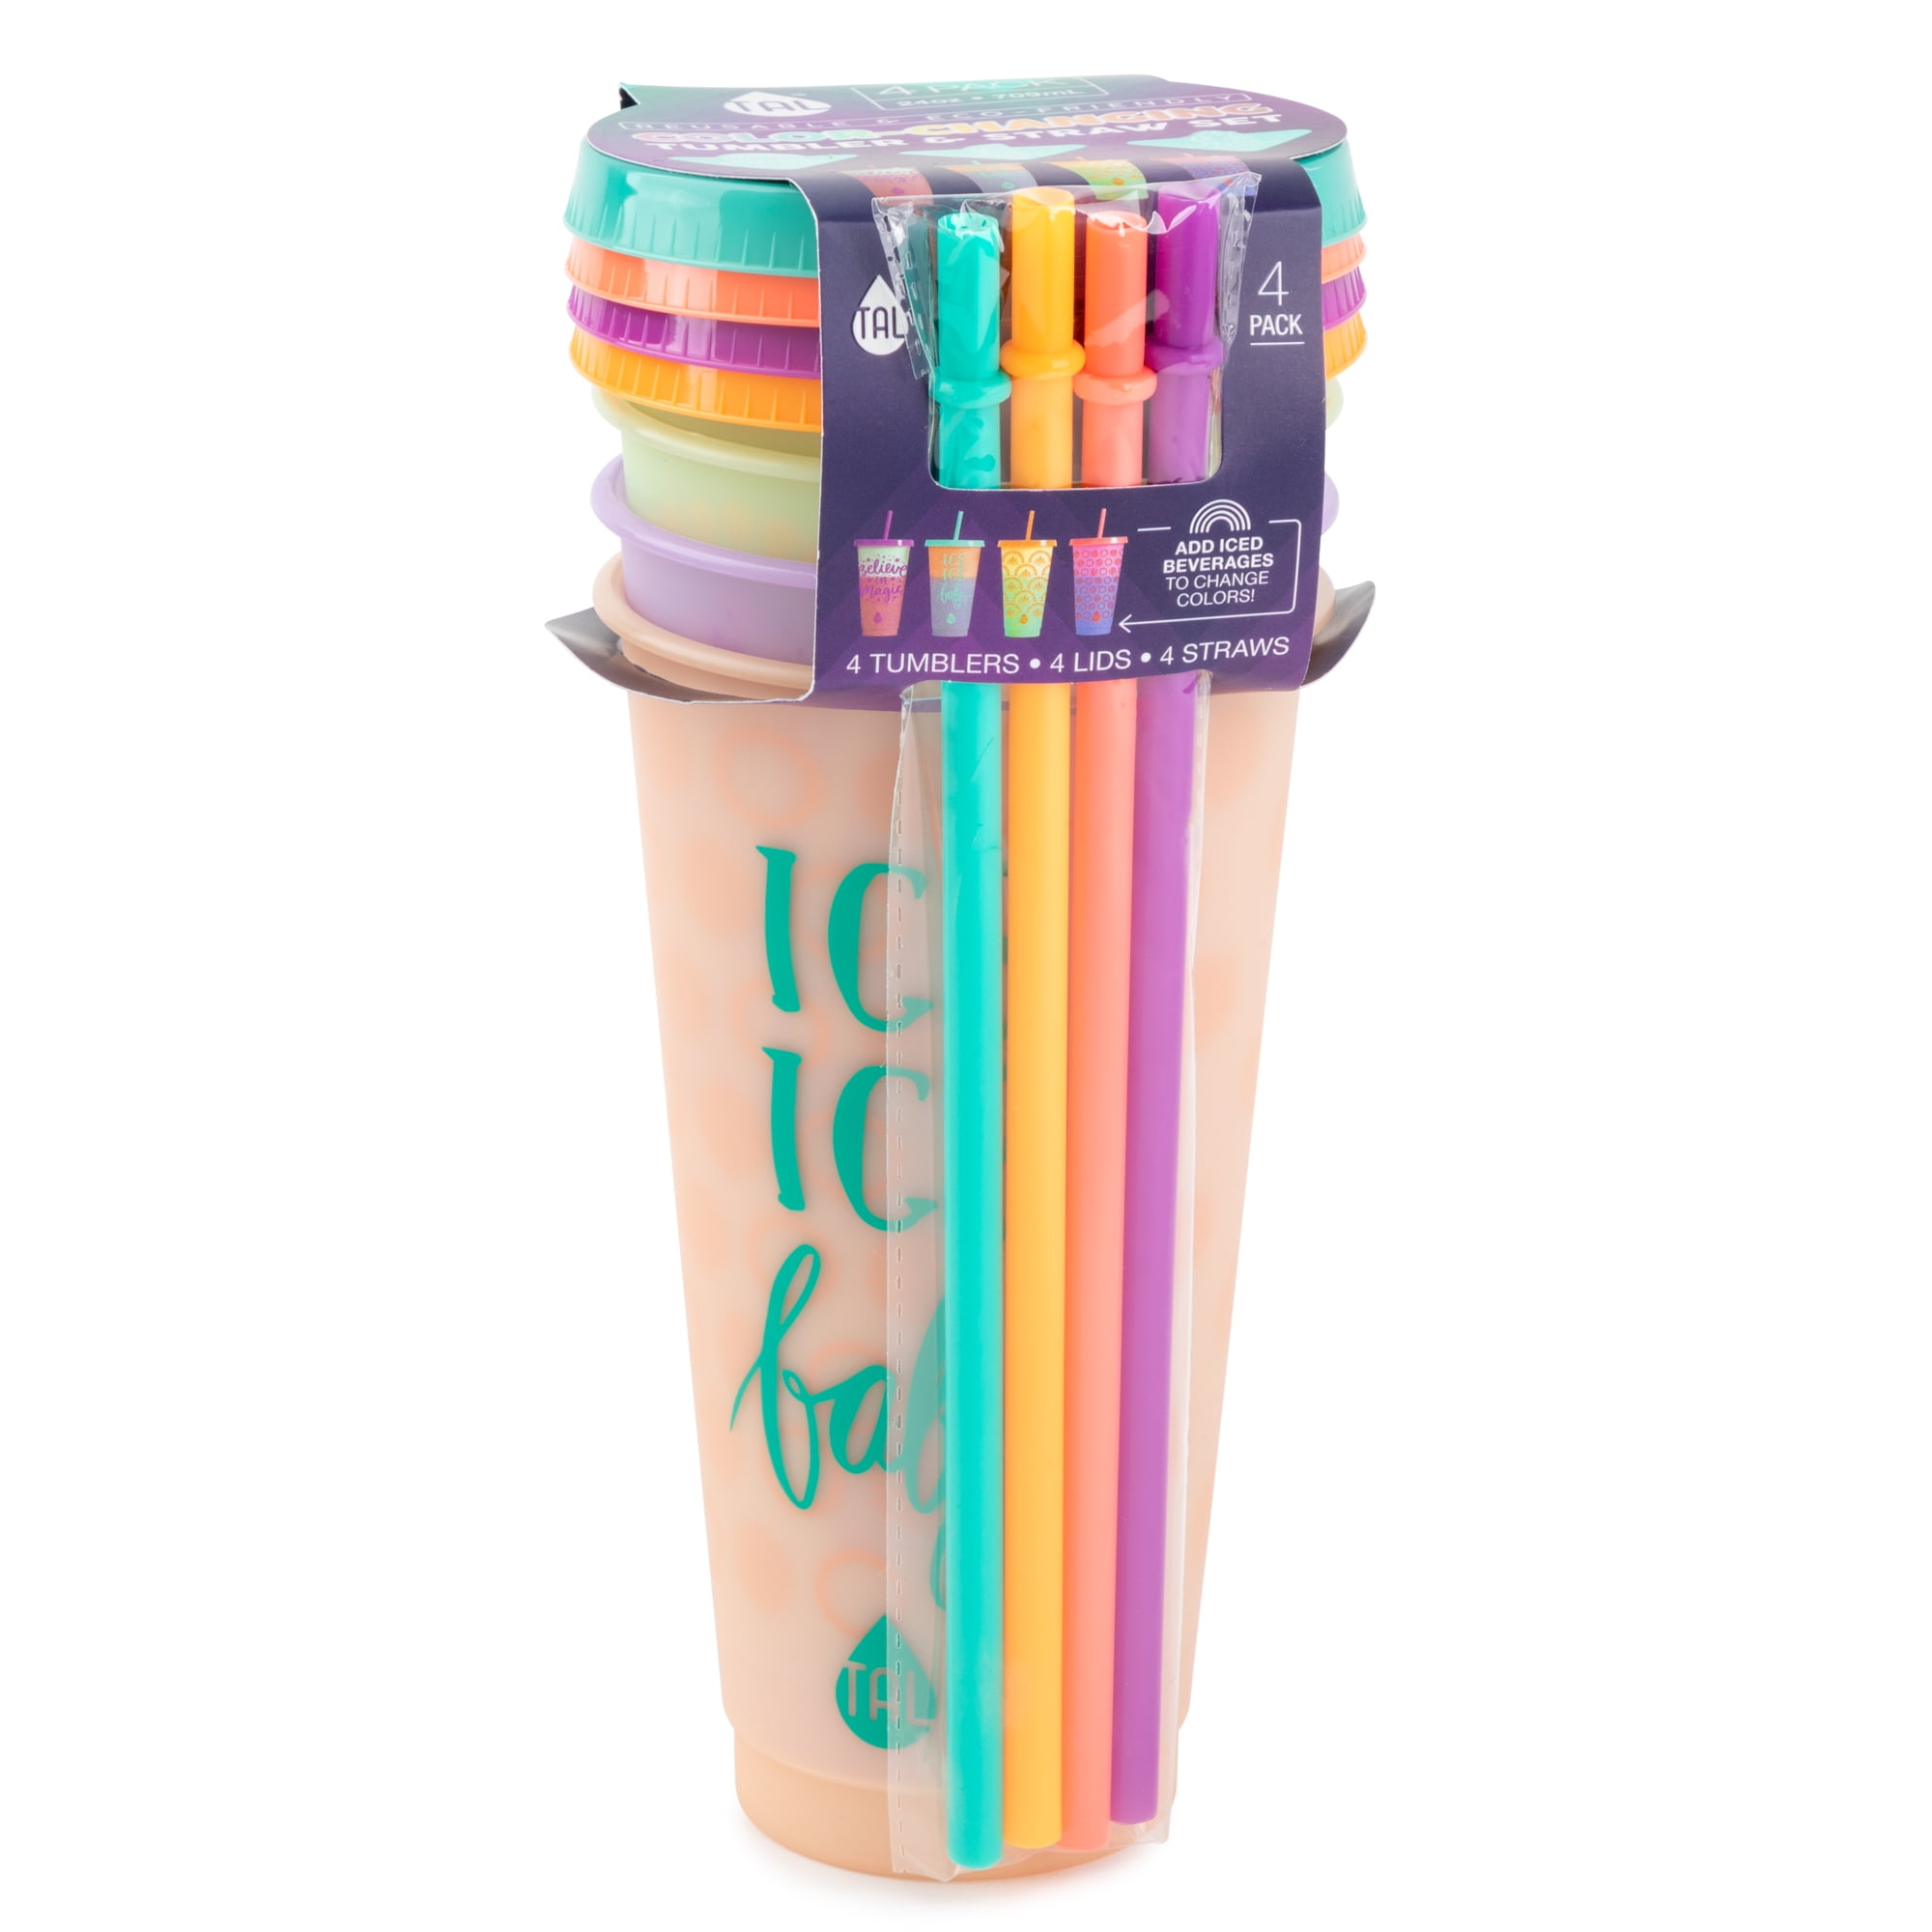 LEAN ON US TAL Color Changing Tumbler & Straw Set. 24 oz. 4 Pack